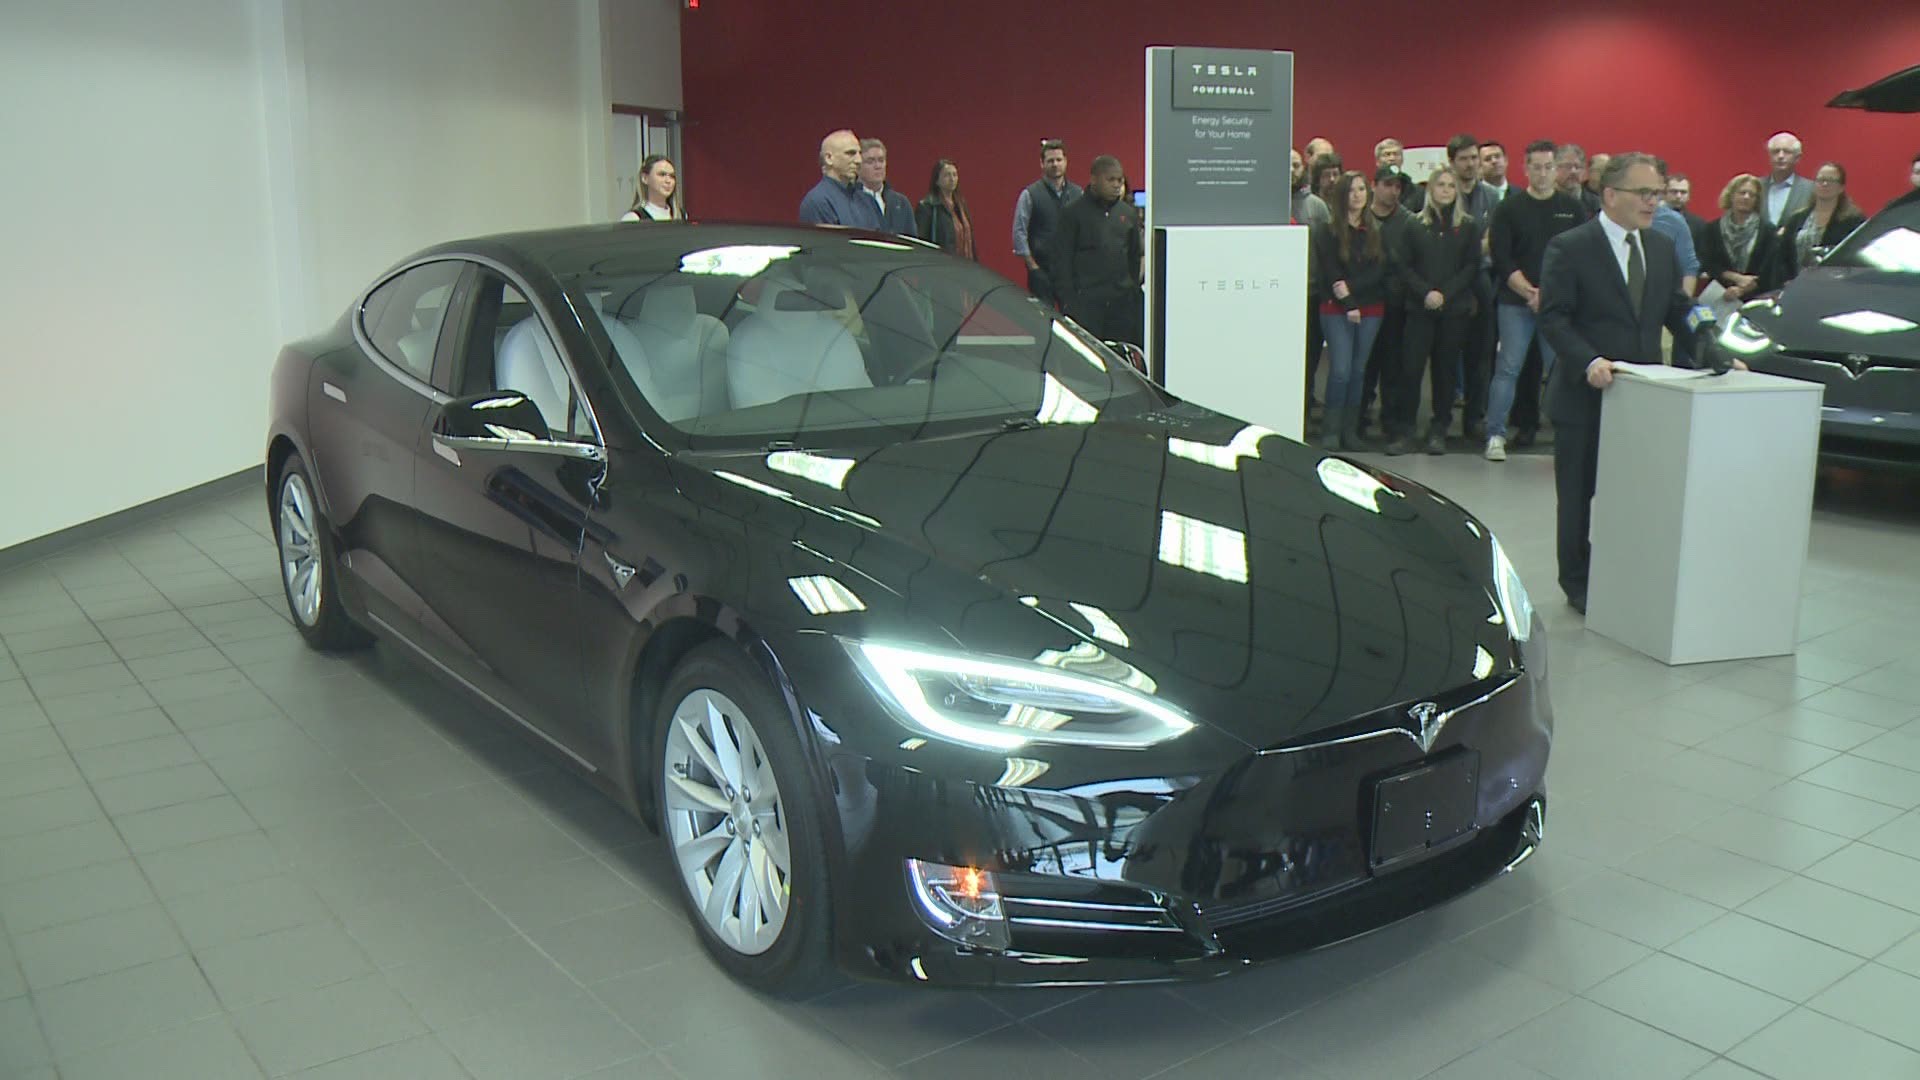 Today, Brent's got your back on a Tesla event.